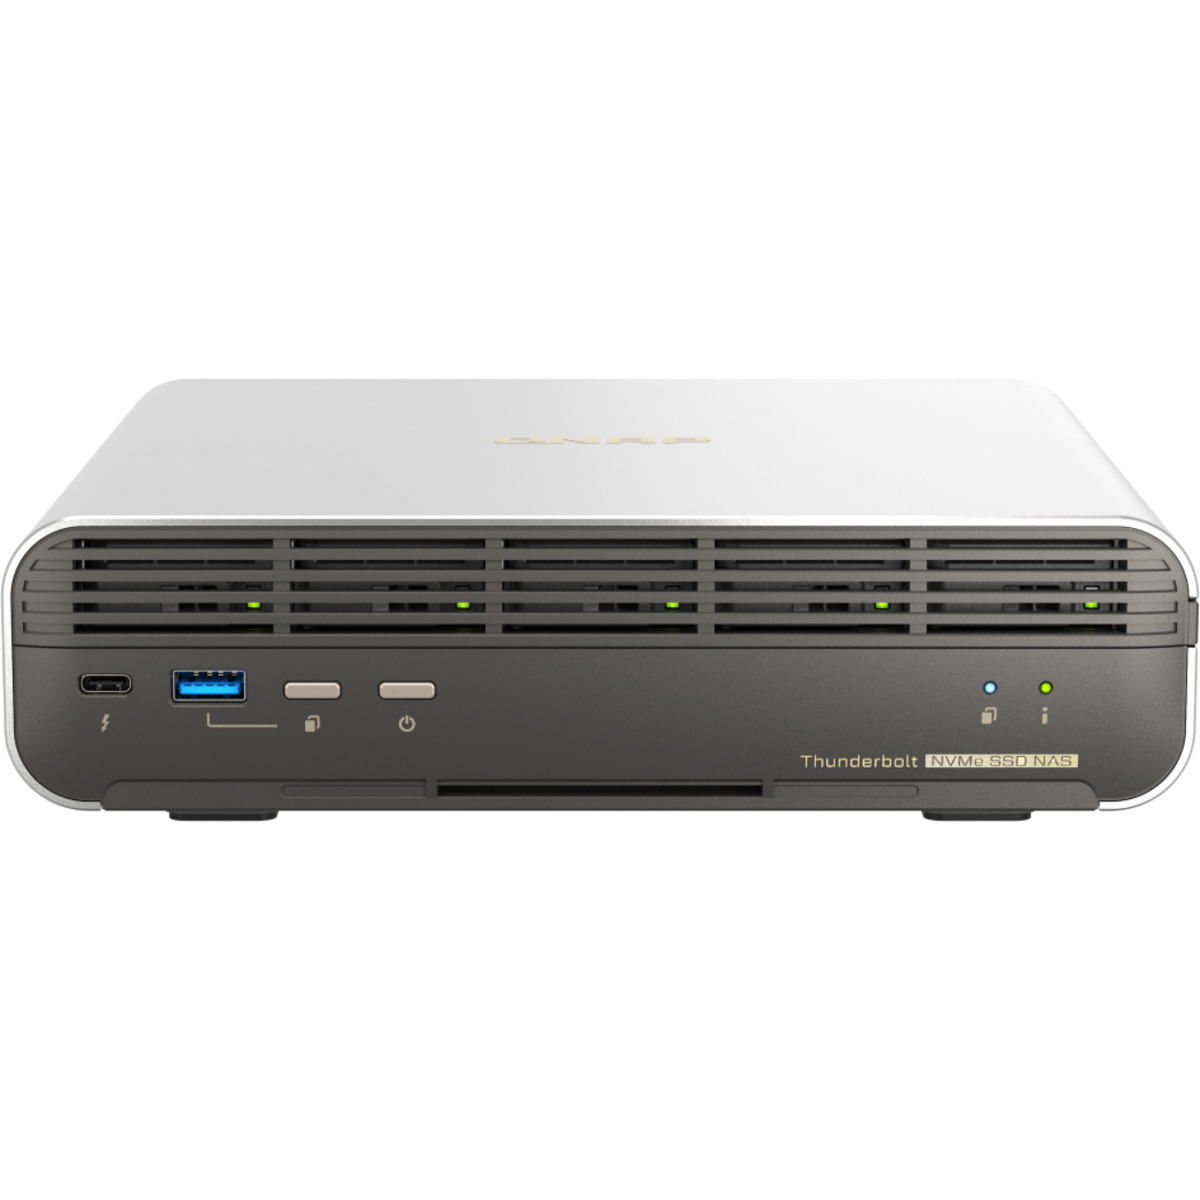 QNAP TBS-h574TX Core i5 Thunderbolt 4 20tb 5-Bay Desktop Multimedia / Power User / Business DAS-NAS - Combo Direct + Network Storage Device 5x4tb Sabrent Rocket 5 SB-RKT5-4TB  14000/12000MB/s M.2 2280 NVMe SSD CONSUMER Class Drives Installed - Burn-In Tested TBS-h574TX Core i5 Thunderbolt 4